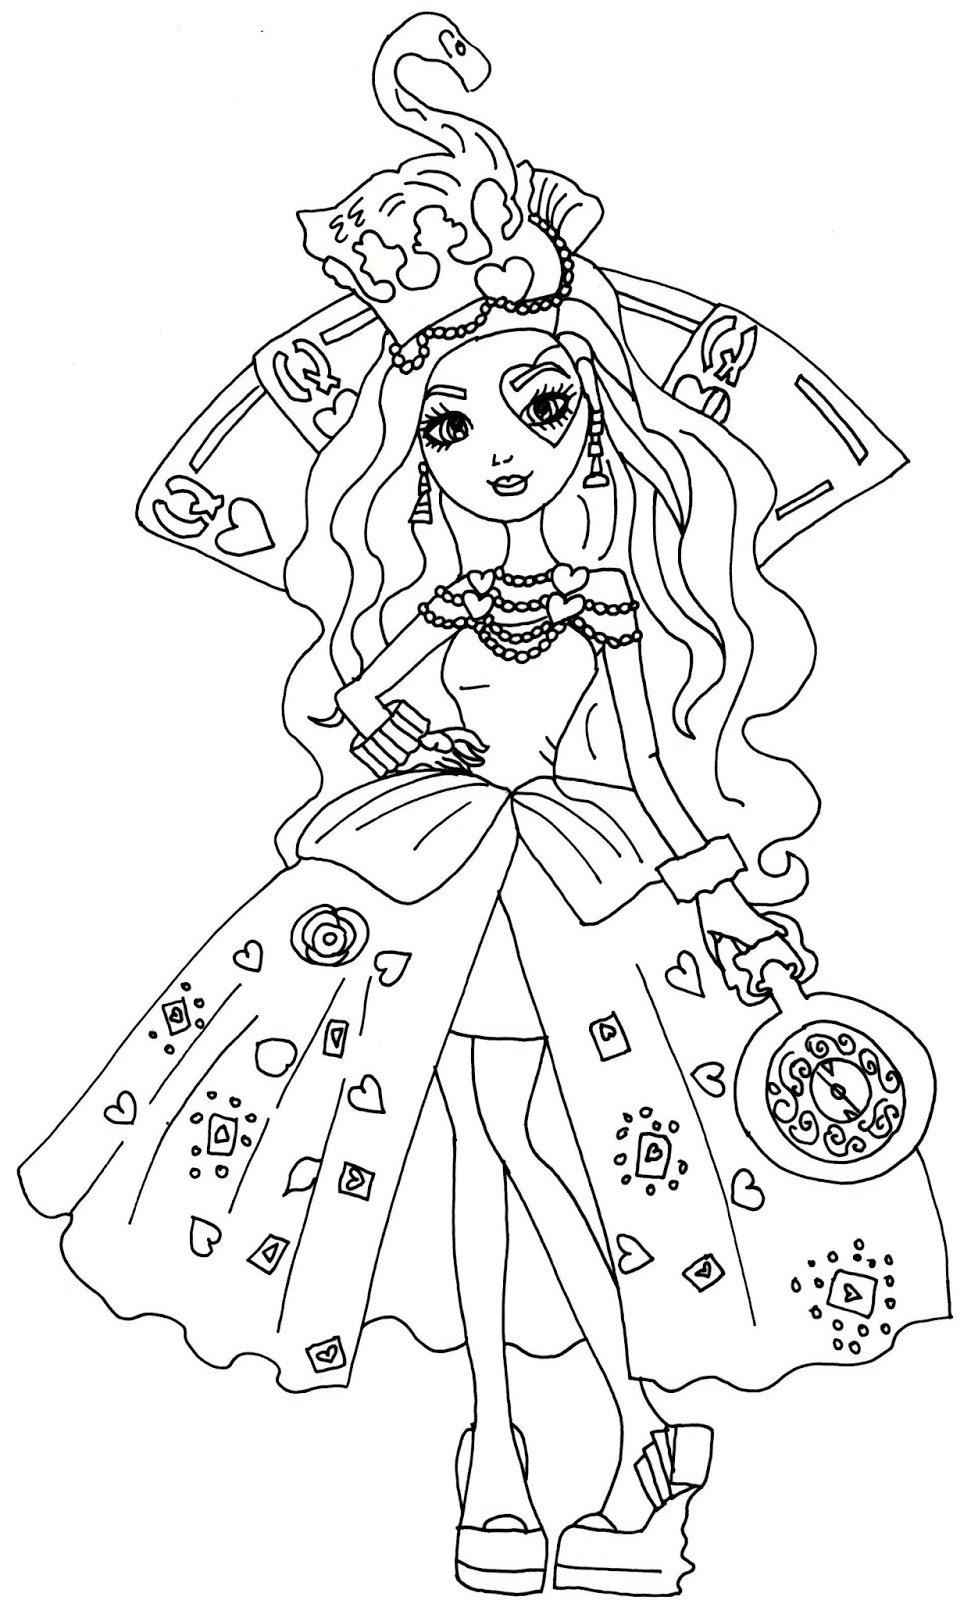 Download Ever After High Coloring Pages - Best Coloring Pages For Kids